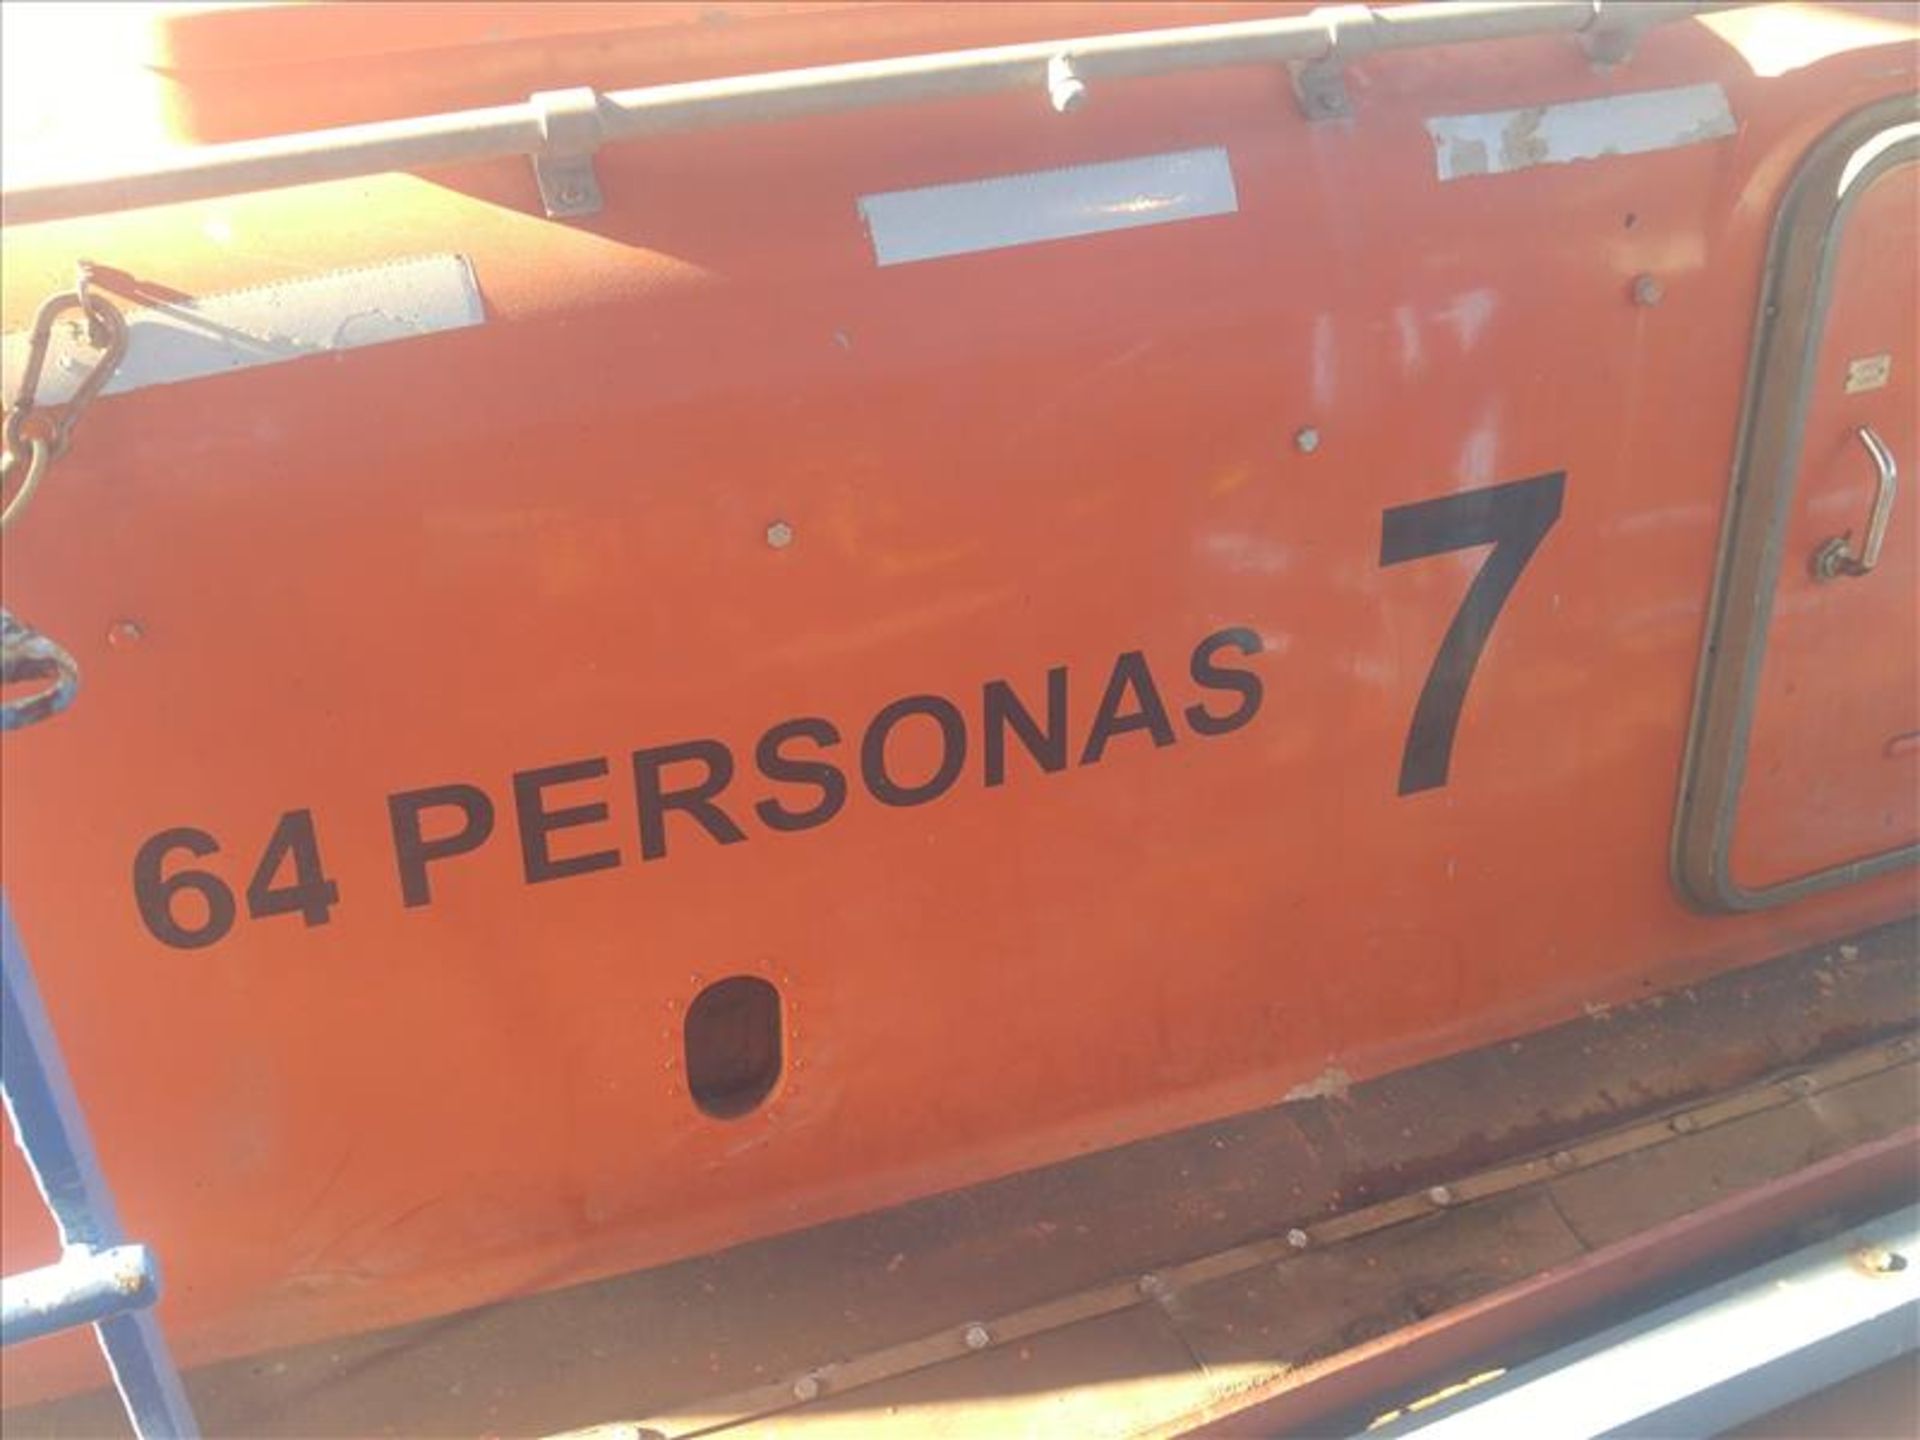 Harding 64 Person Lifeboat, No. of Pers.: 64, Material: G.R.P, L: 9.8, B: 3.3, D: 1.38, CUB: 33. - Image 4 of 17